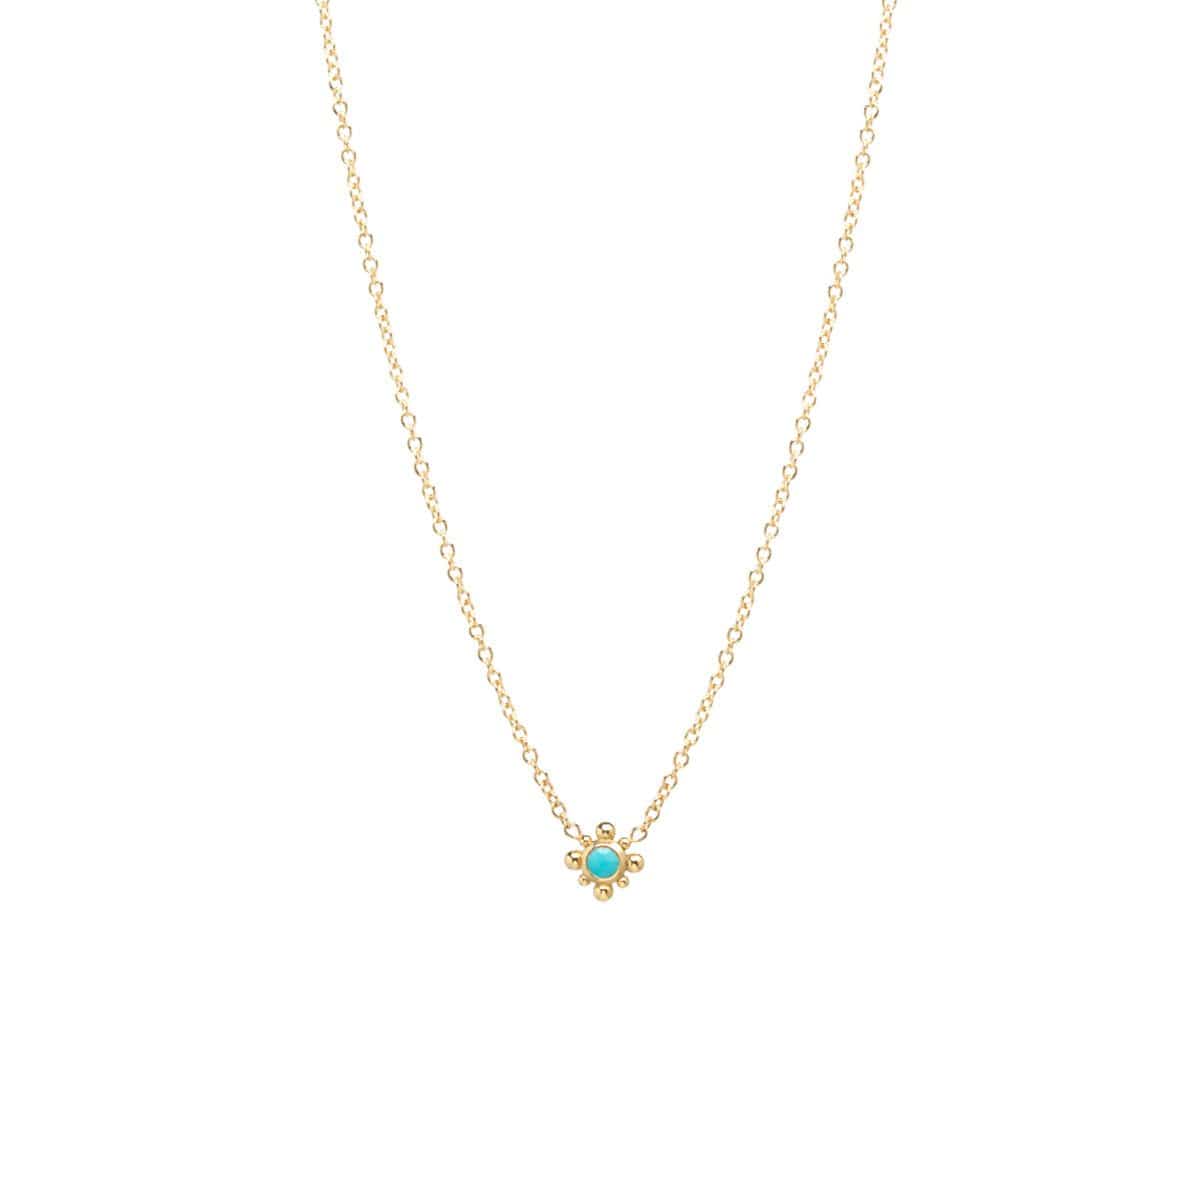 Load image into Gallery viewer, NKL-14K 14K Gold Tiny Bead Turquoise Starburst Necklace
